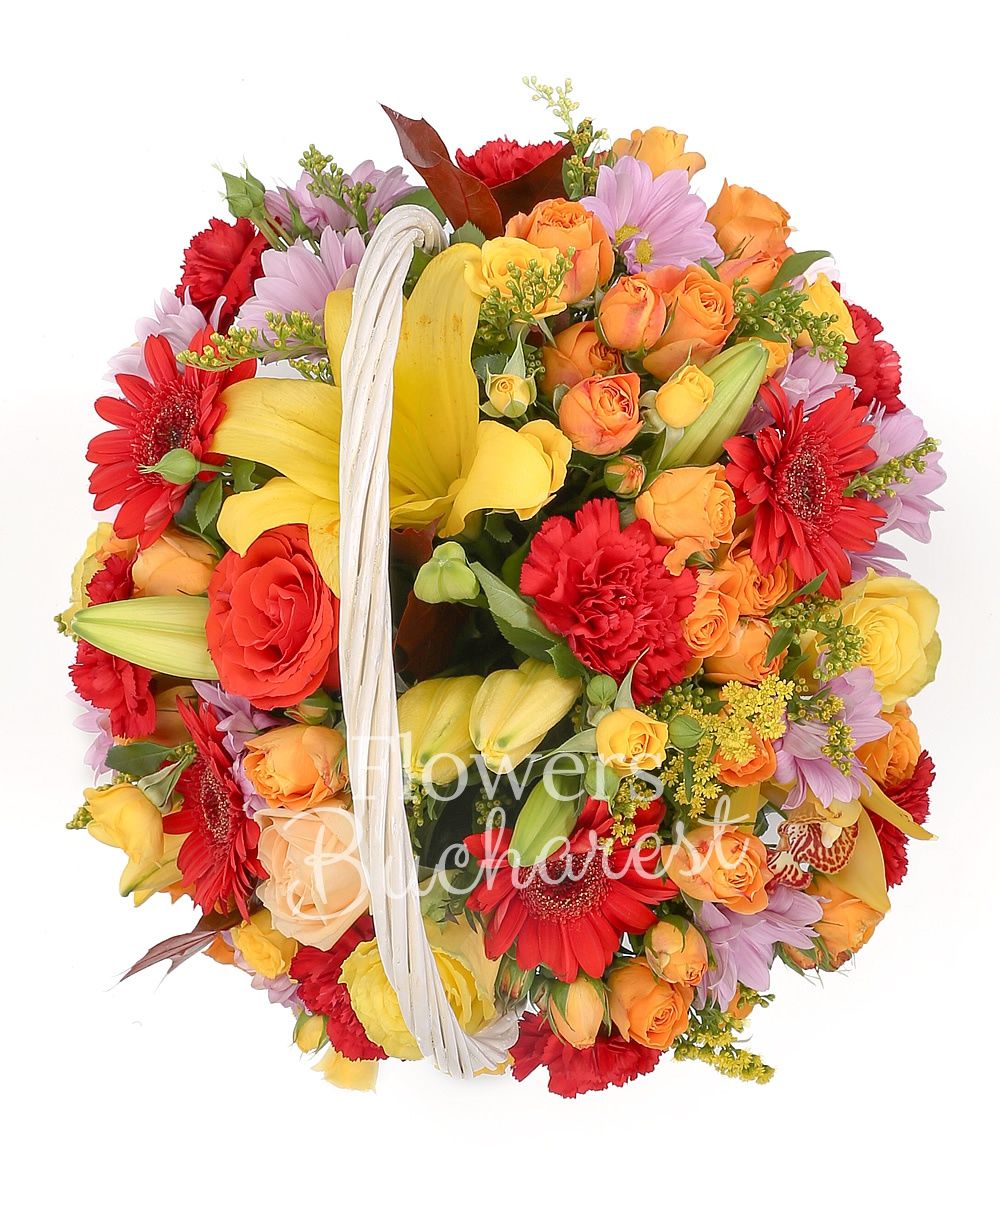 2 yellow lilies, 3 red roses, 5 red gerberas, 5 yellow roses, 2 cream roses, 3 yellow miniroses, 4 orange miniroses, 3 pink chrysanthemums, 7 red carnations, solidago, greenery